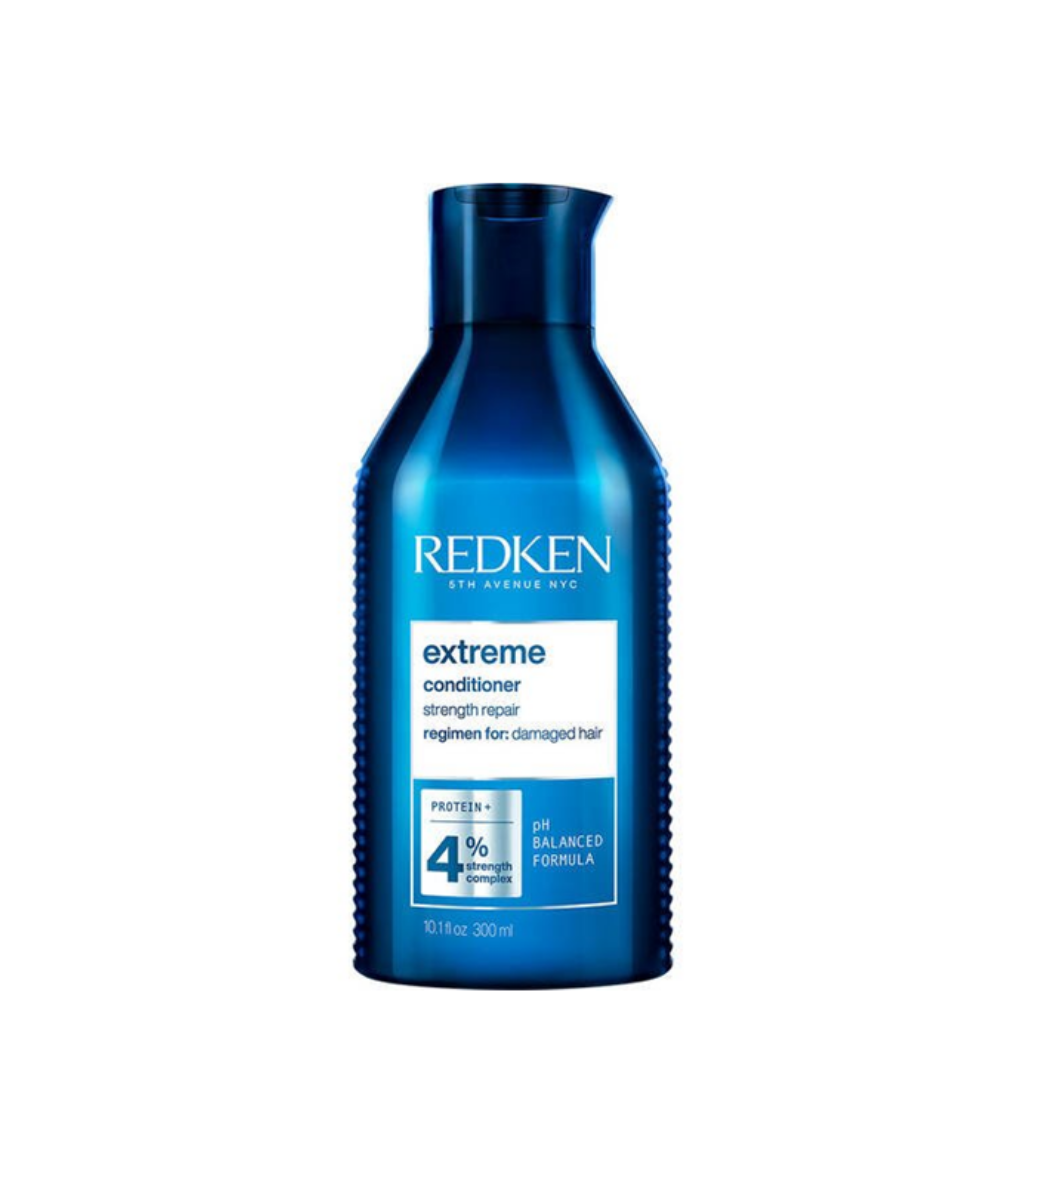 REDKEN 5TH AVENUE NYC REDKEN - Extreme™ Conditioner For Damaged Hair - 16.9 fl oz / 500ml